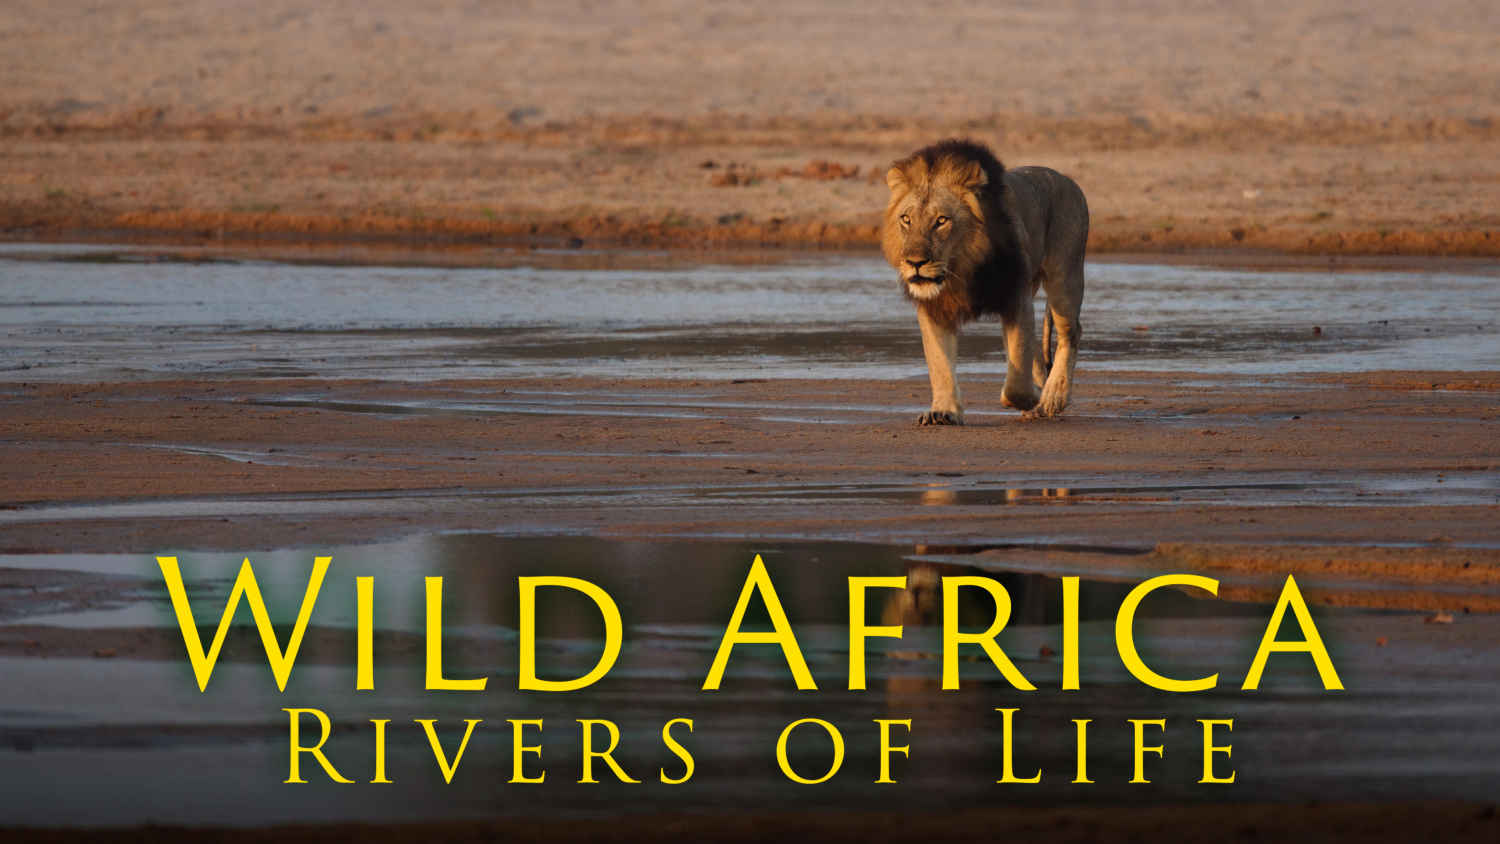 Wild Africa: Rivers of Life